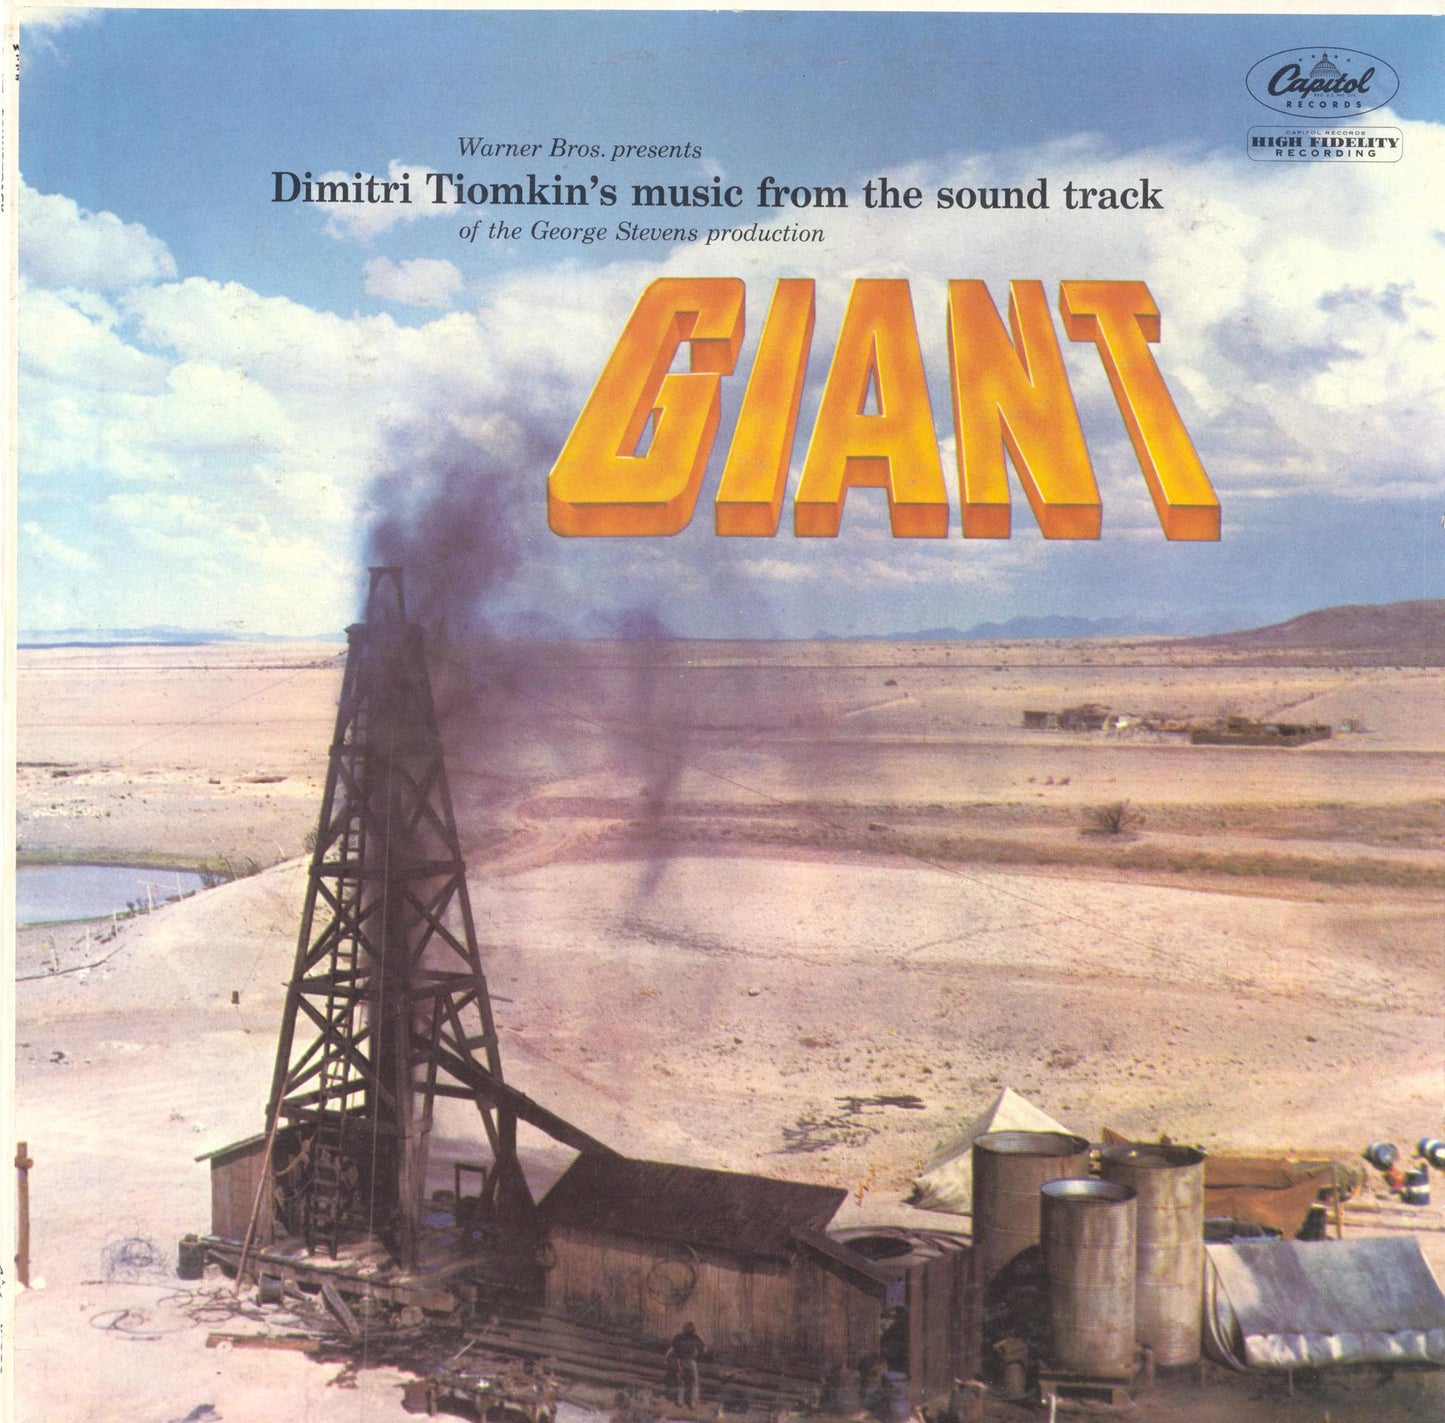 Dimitri Tiomkin's music from the sound track Giant